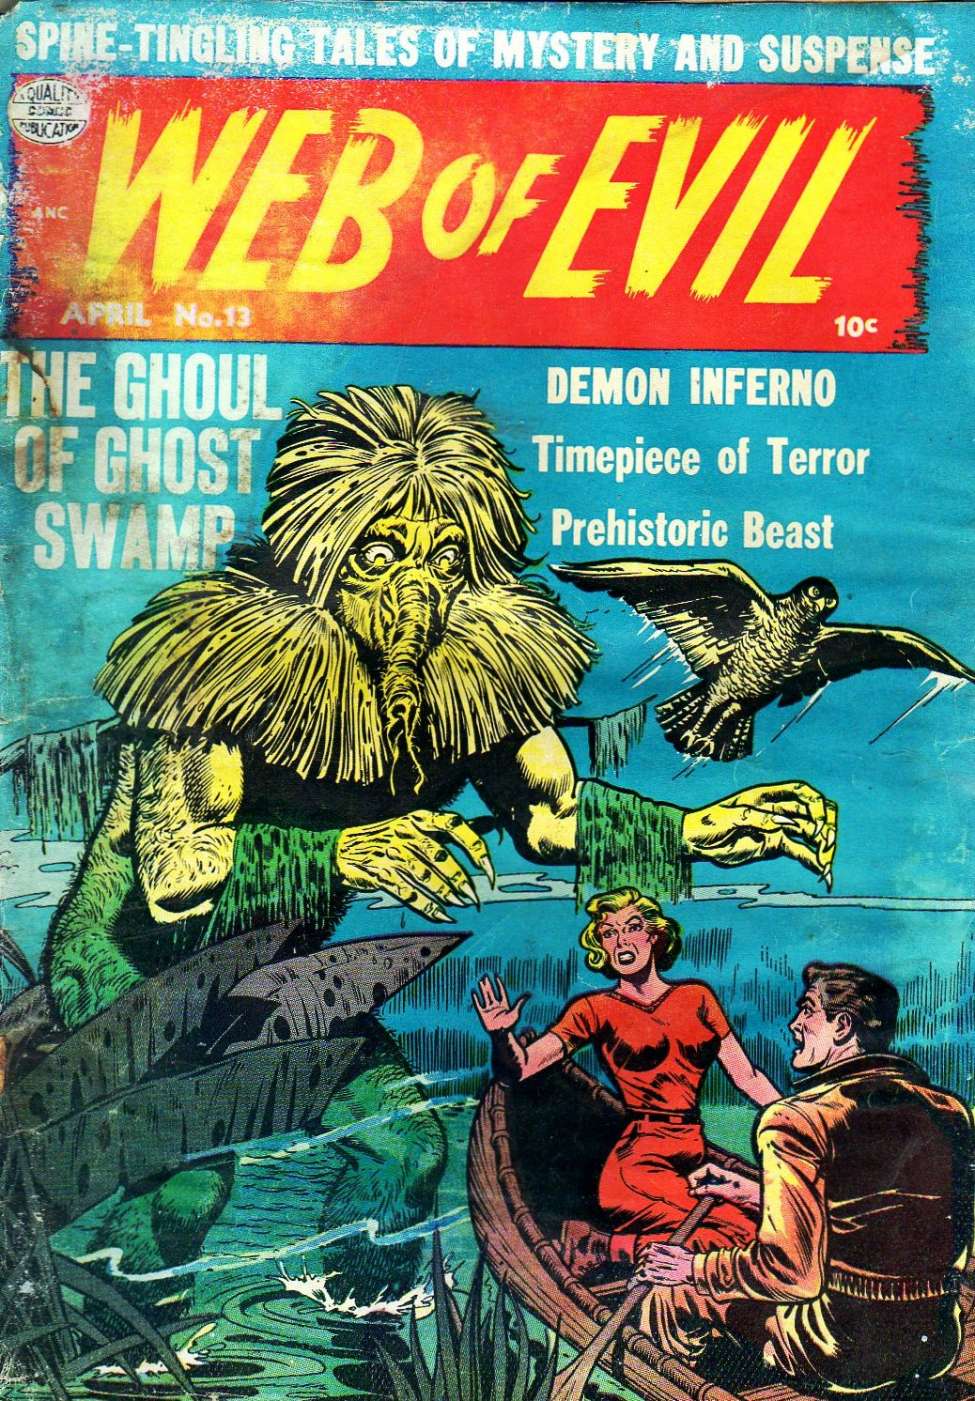 Comic Book Cover For Web of Evil 13